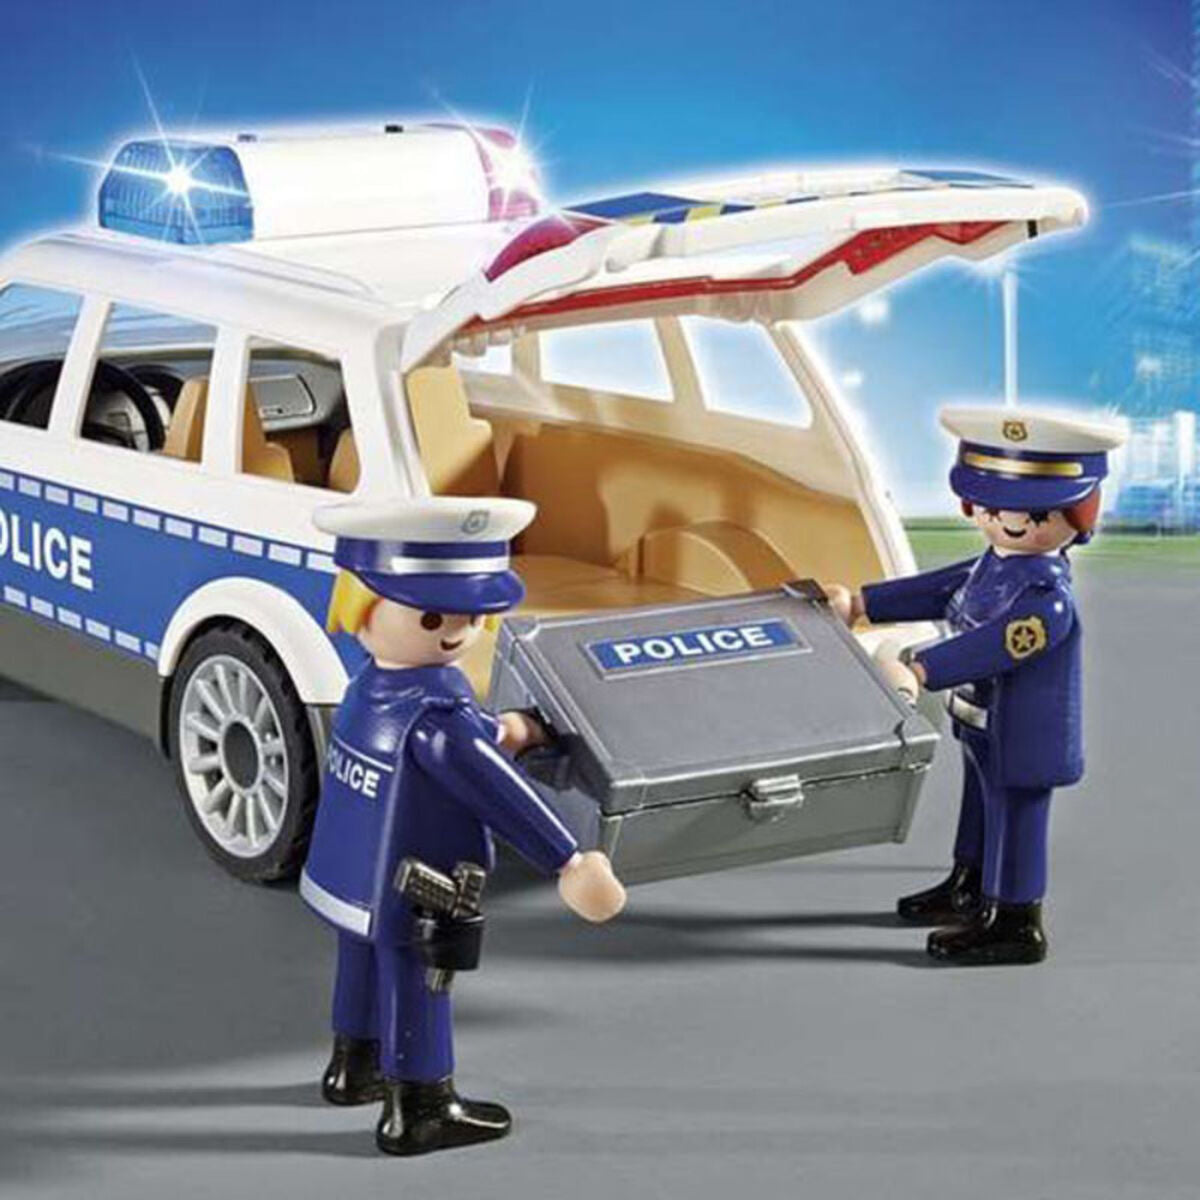 City Action Police Playmobil Squad Car with Lights and Sound